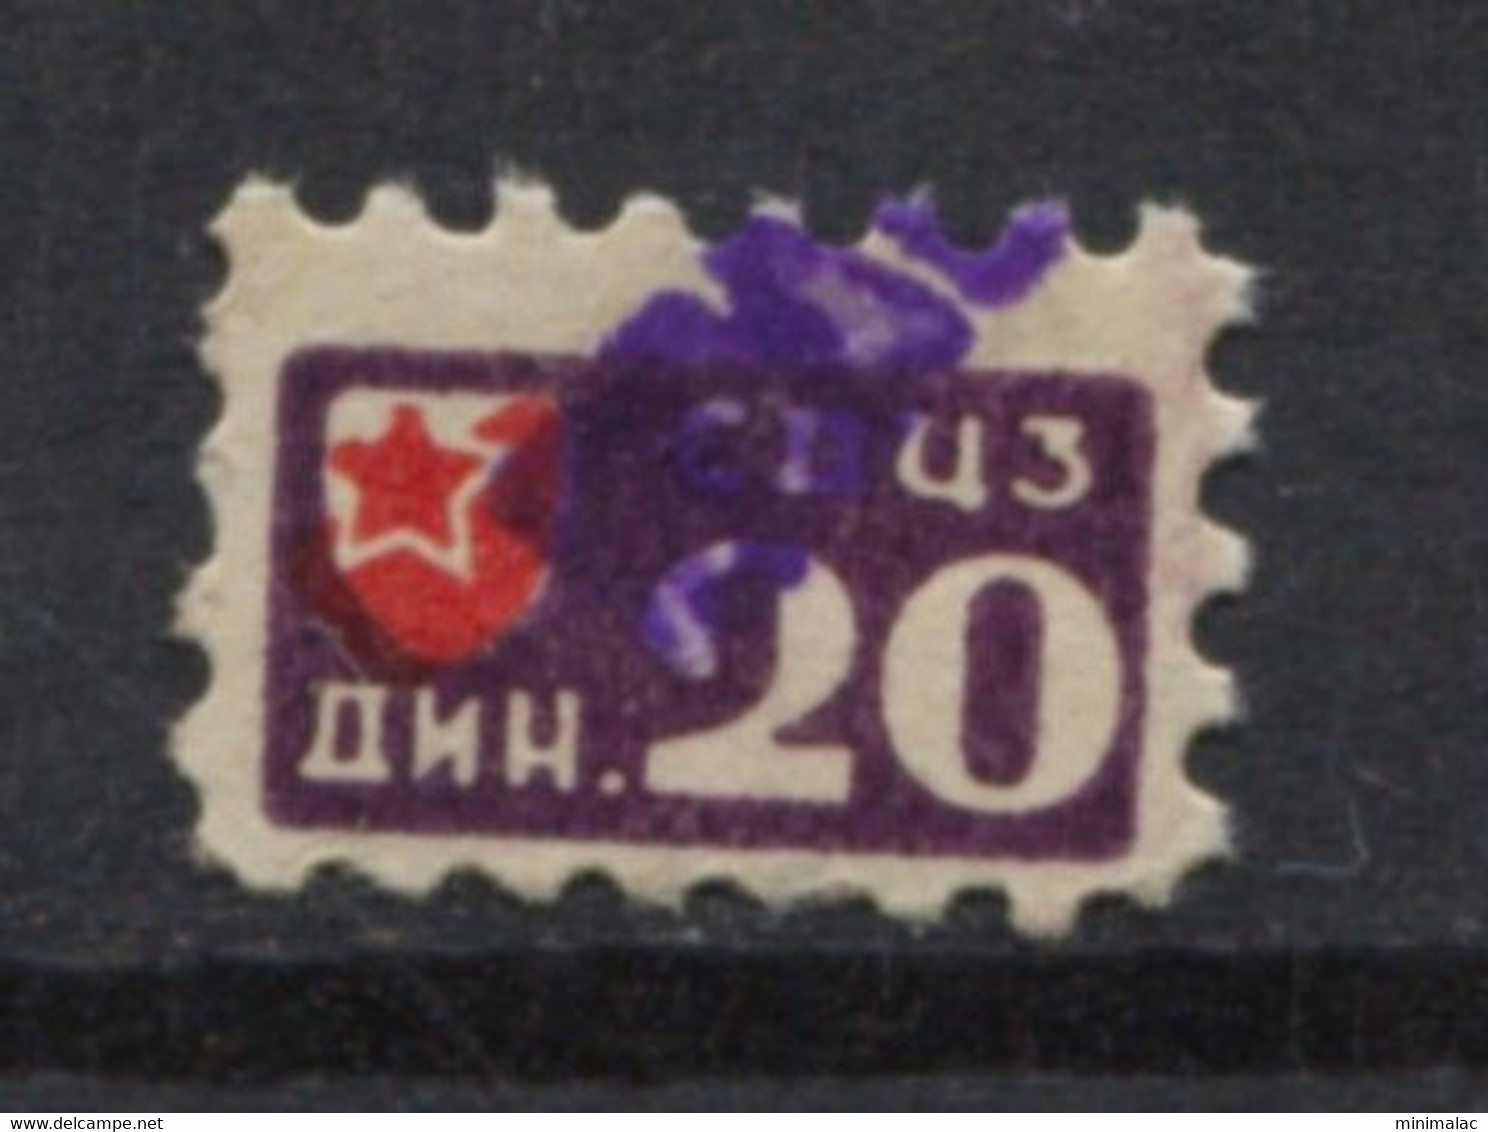 Yugoslavia, Sports Society Red Star Beograd, Football, Stamp For Membership, Revenue, Tax Stamp 20 - Oficiales